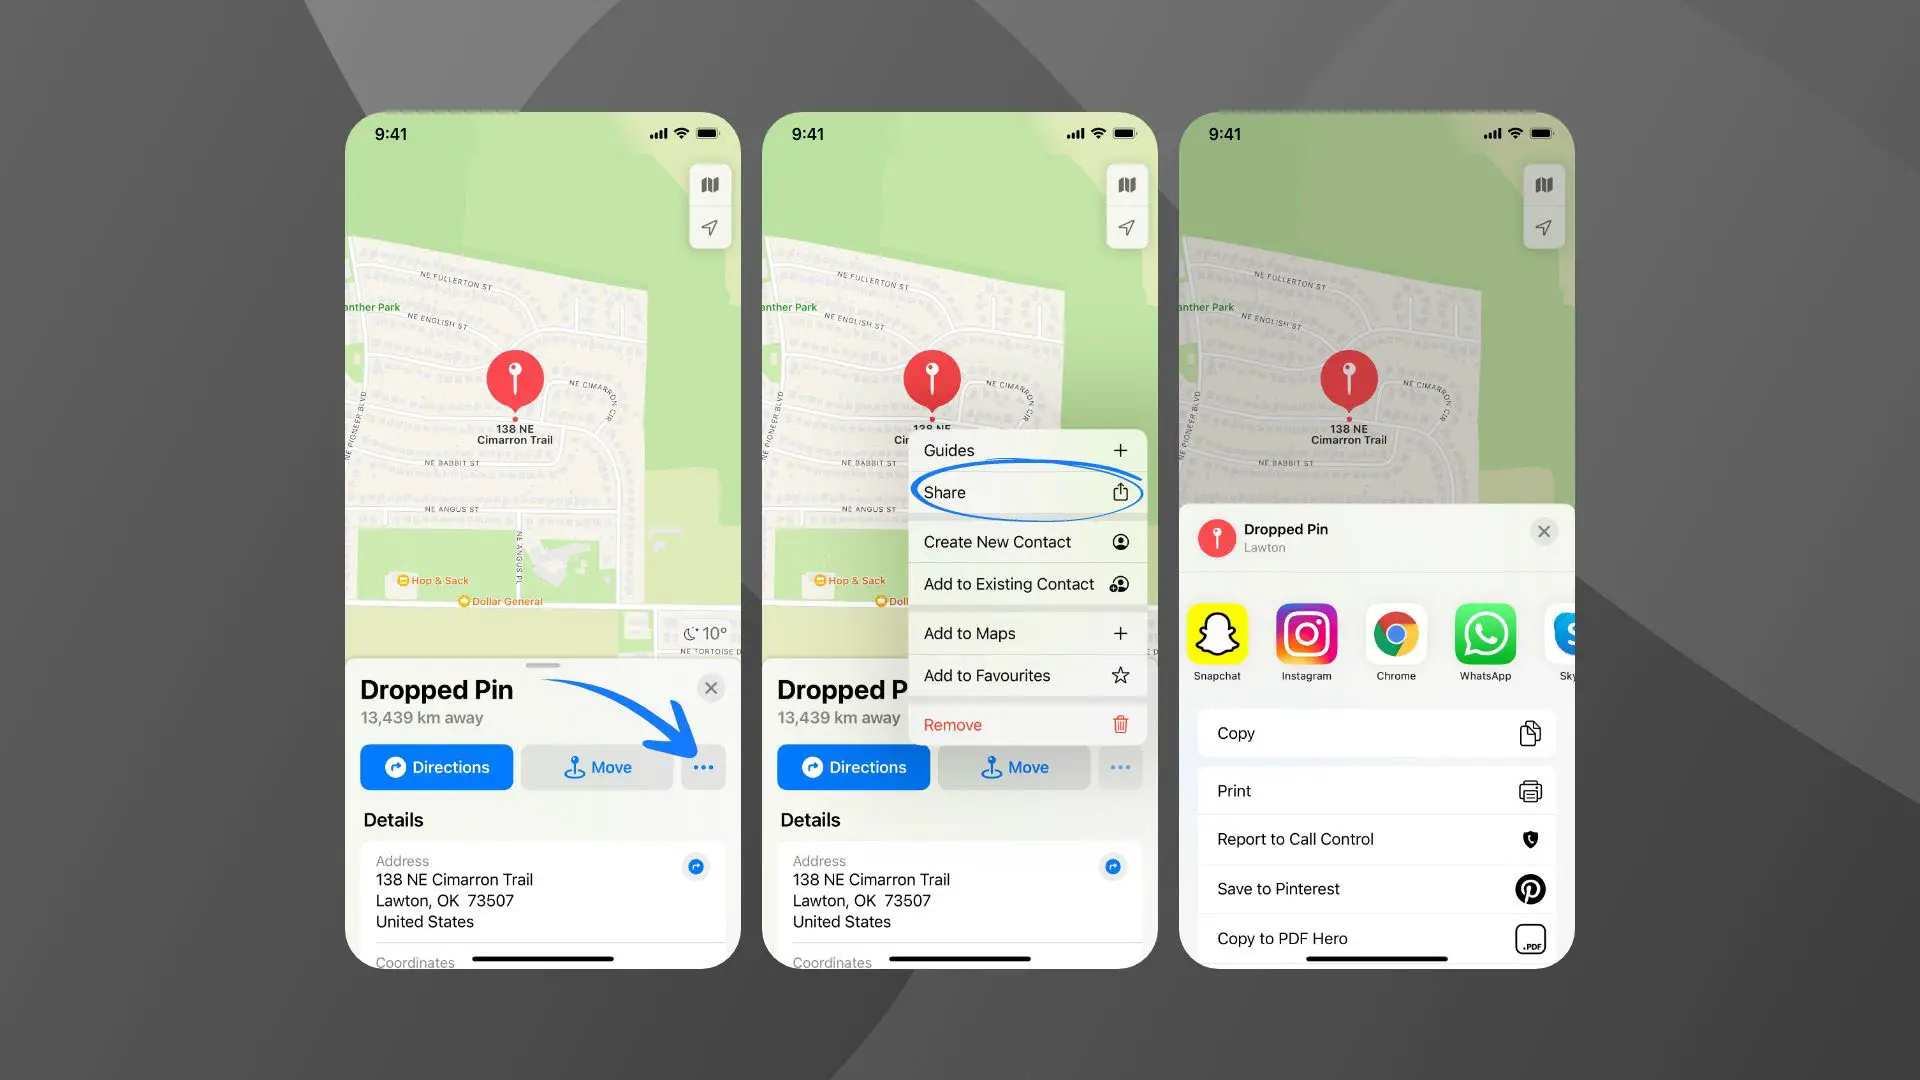 Show pin sharing options on both apple and Google map (2 slides)